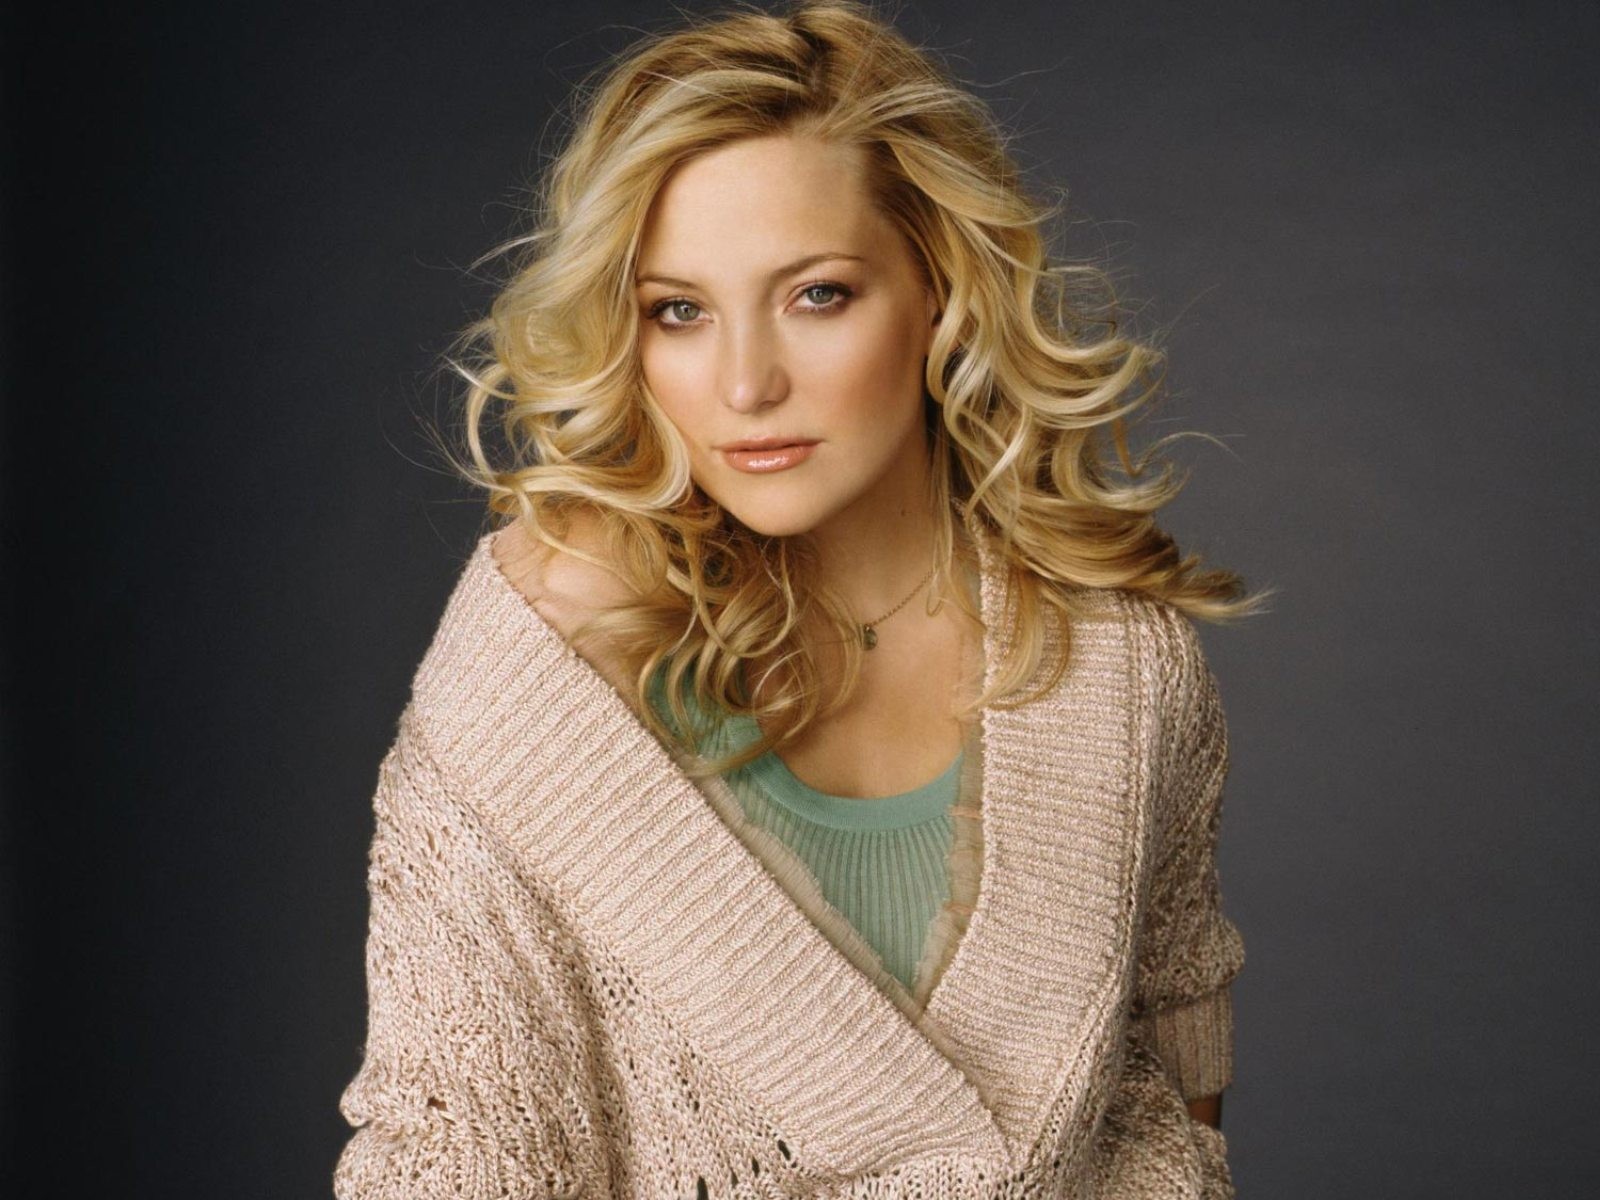 Kate Hudson Images Wallpapers